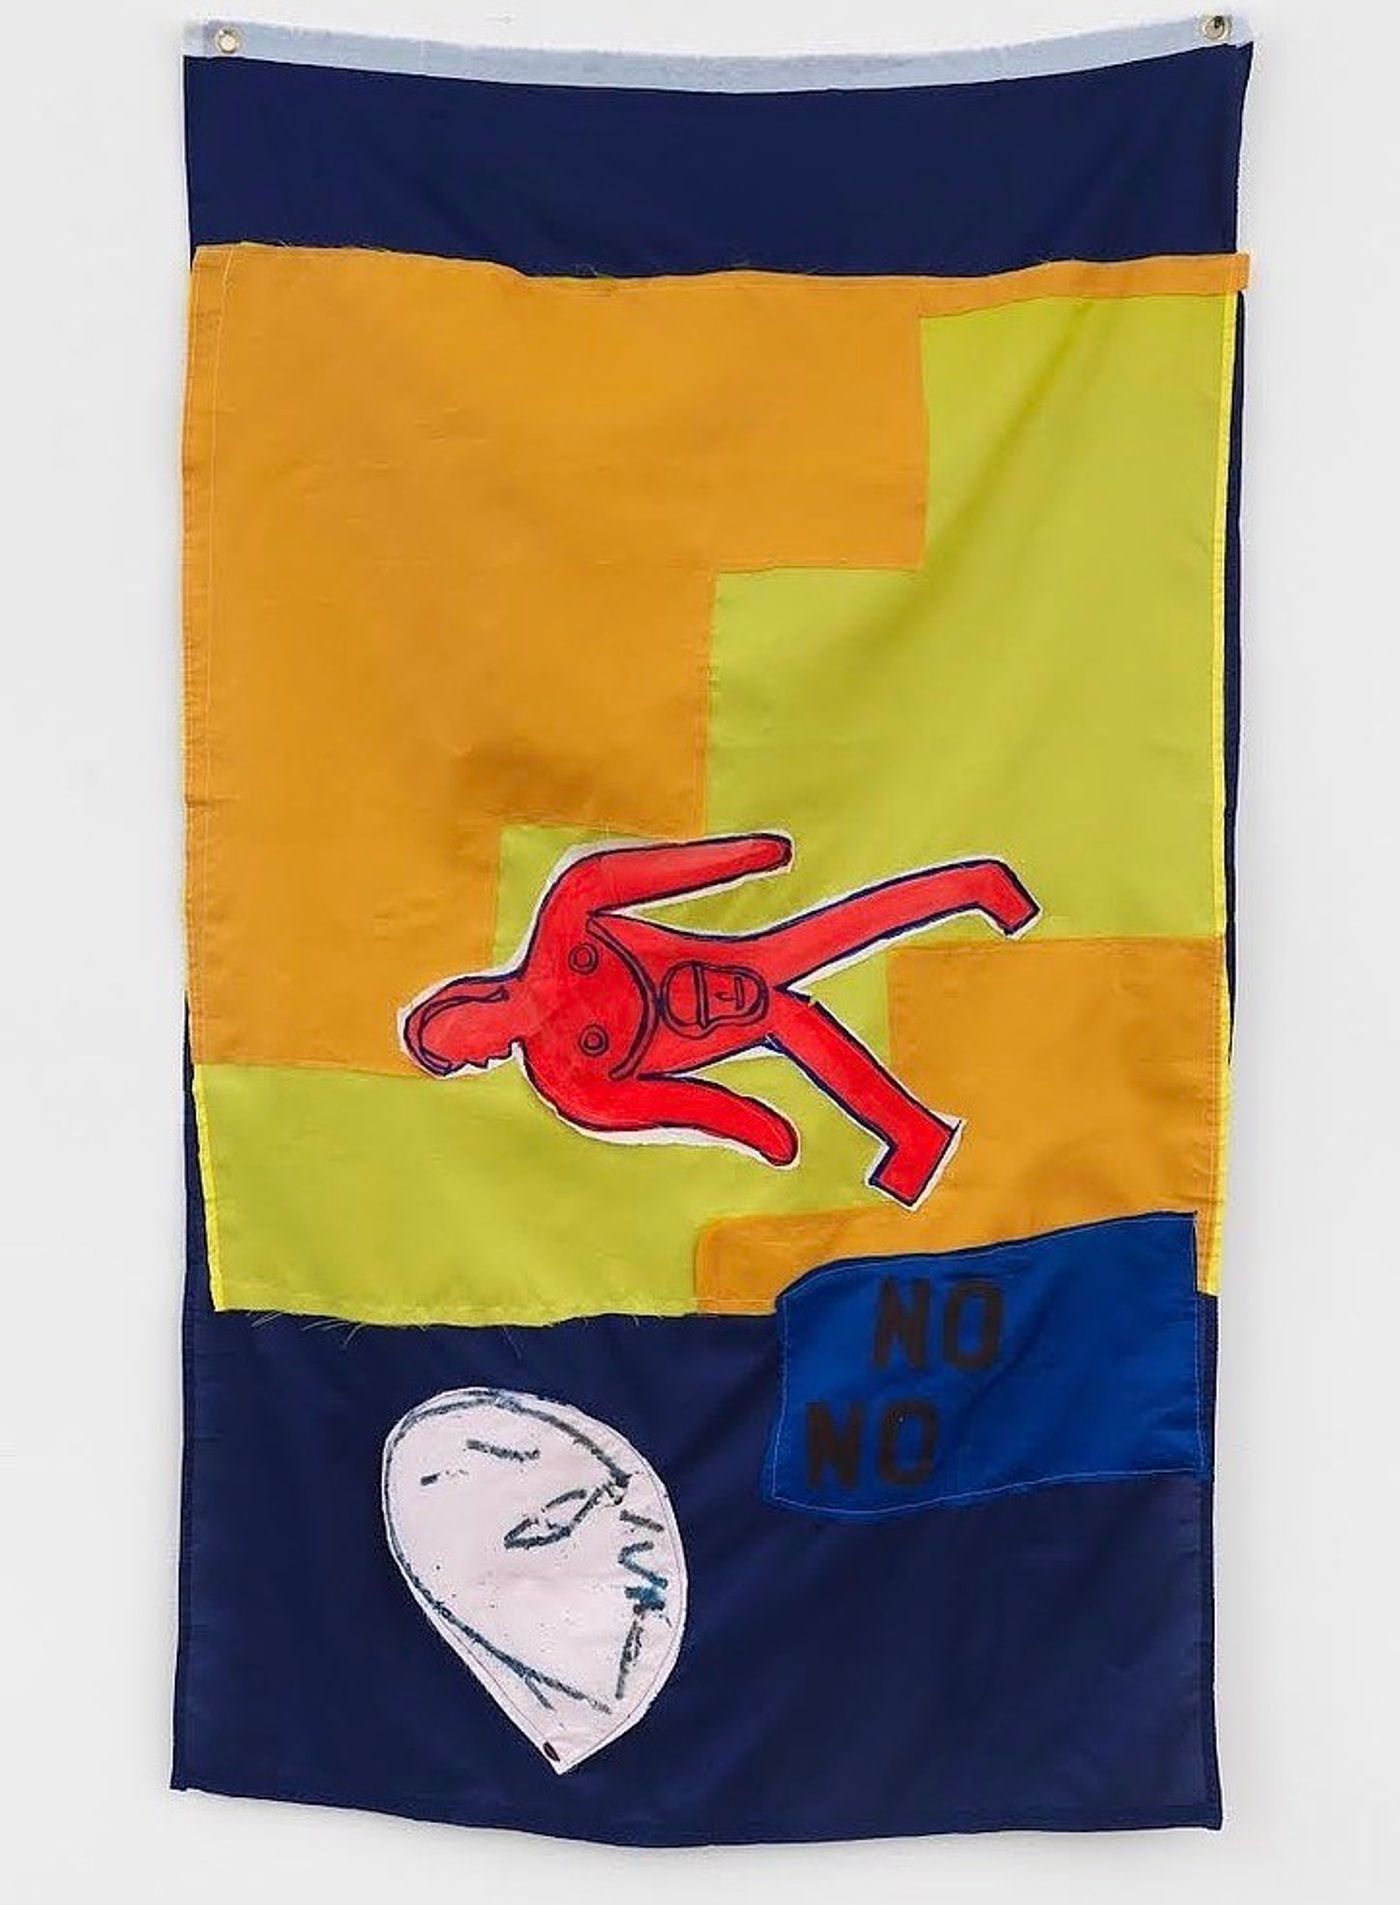 Image of Untitled (No), 2020: Fabric and paint on flag